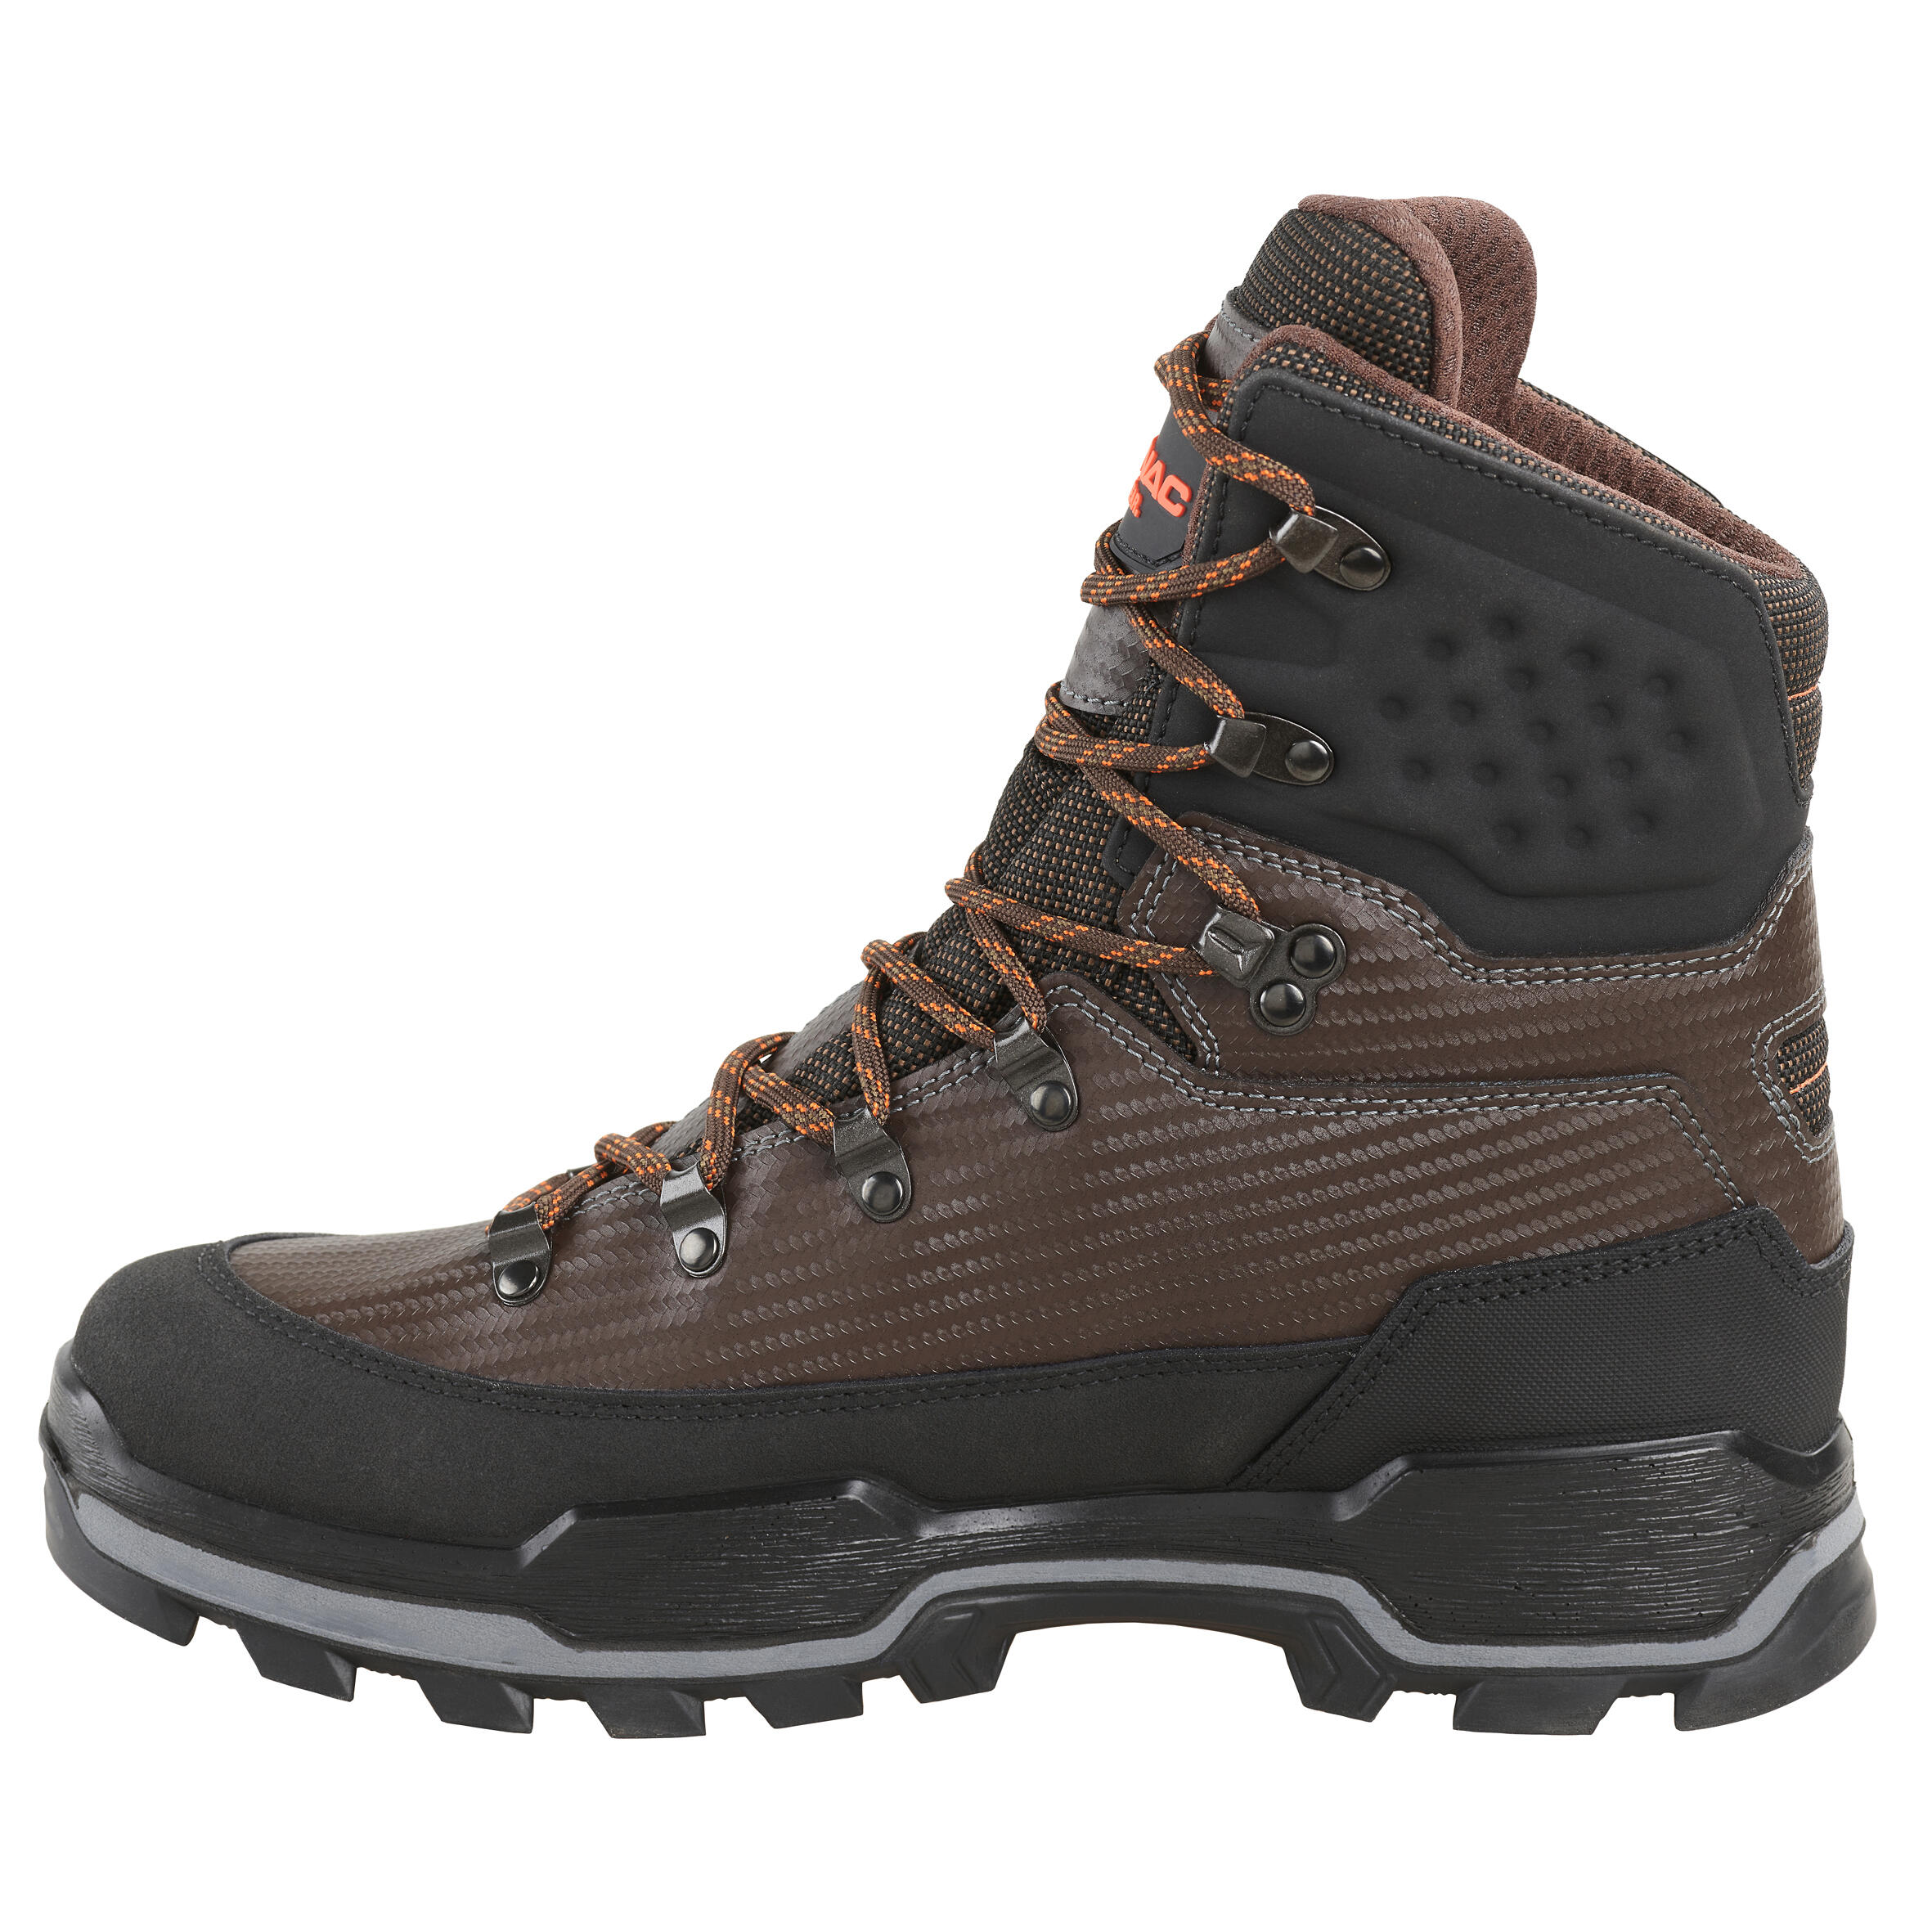 WATERPROOF AND DURABLE HUNTING BOOTS CROSSHUNT 900 - BROWN V2 2/5